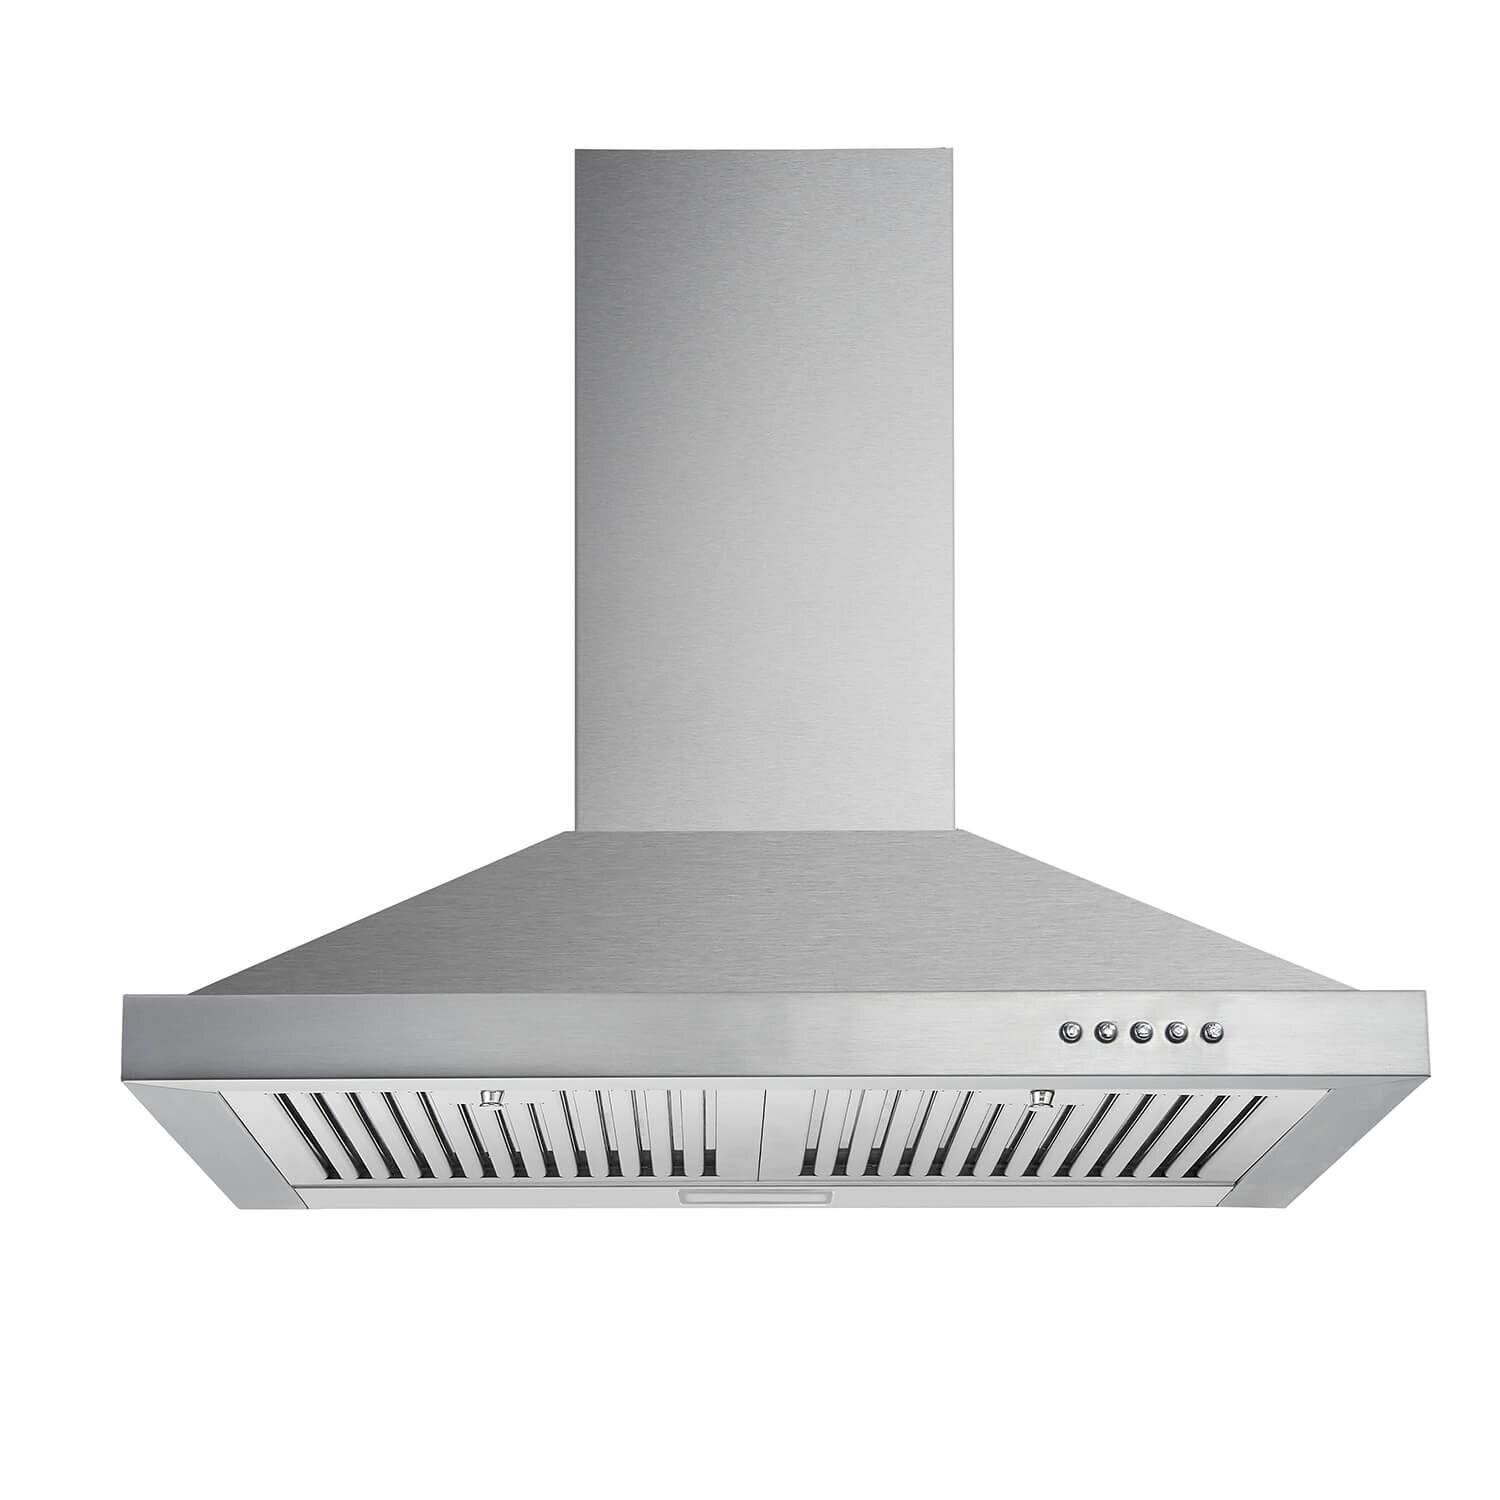 Zomagas 24 Inch Range Hood, Wall Mount Vent Hood in Stainless Steel with  Ducted/Ductless Convertible Duct, 3 Speed Exhaust Fan, Energy Saving LED